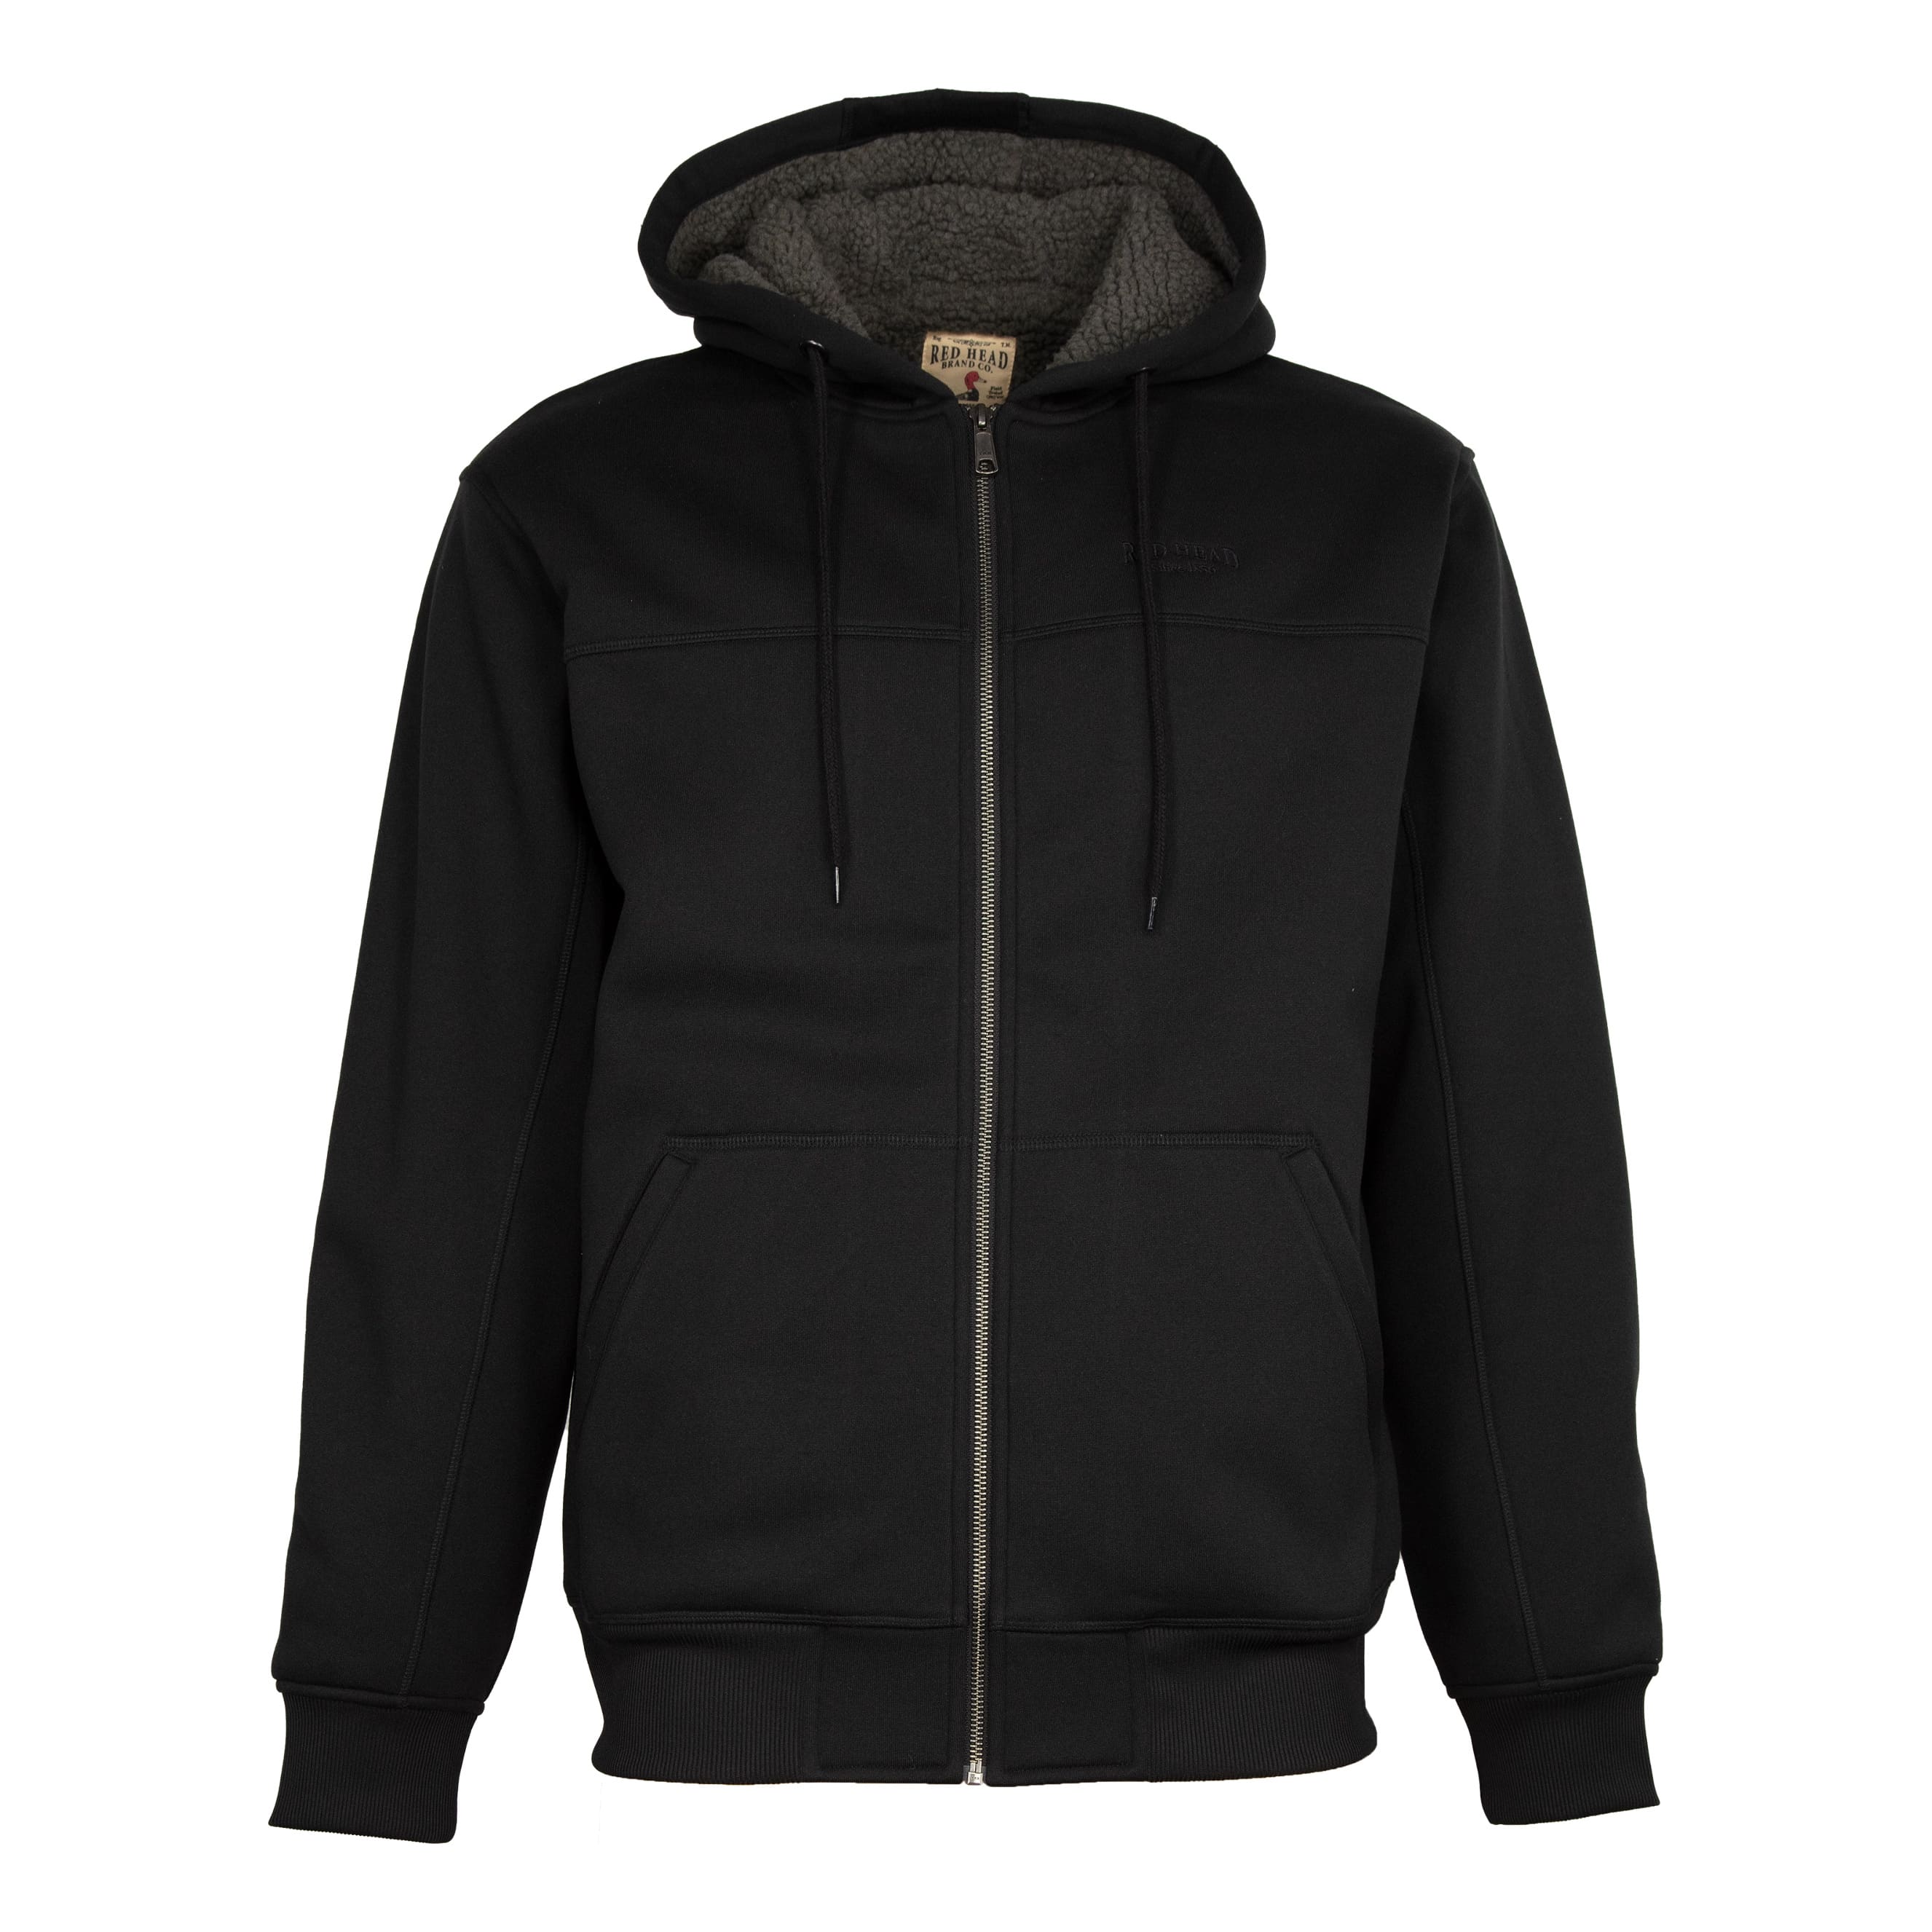 Hoodie Jackets - Falls Creek, Sherpa lined, Zip Up with Pockets Gray M, L &  2XL